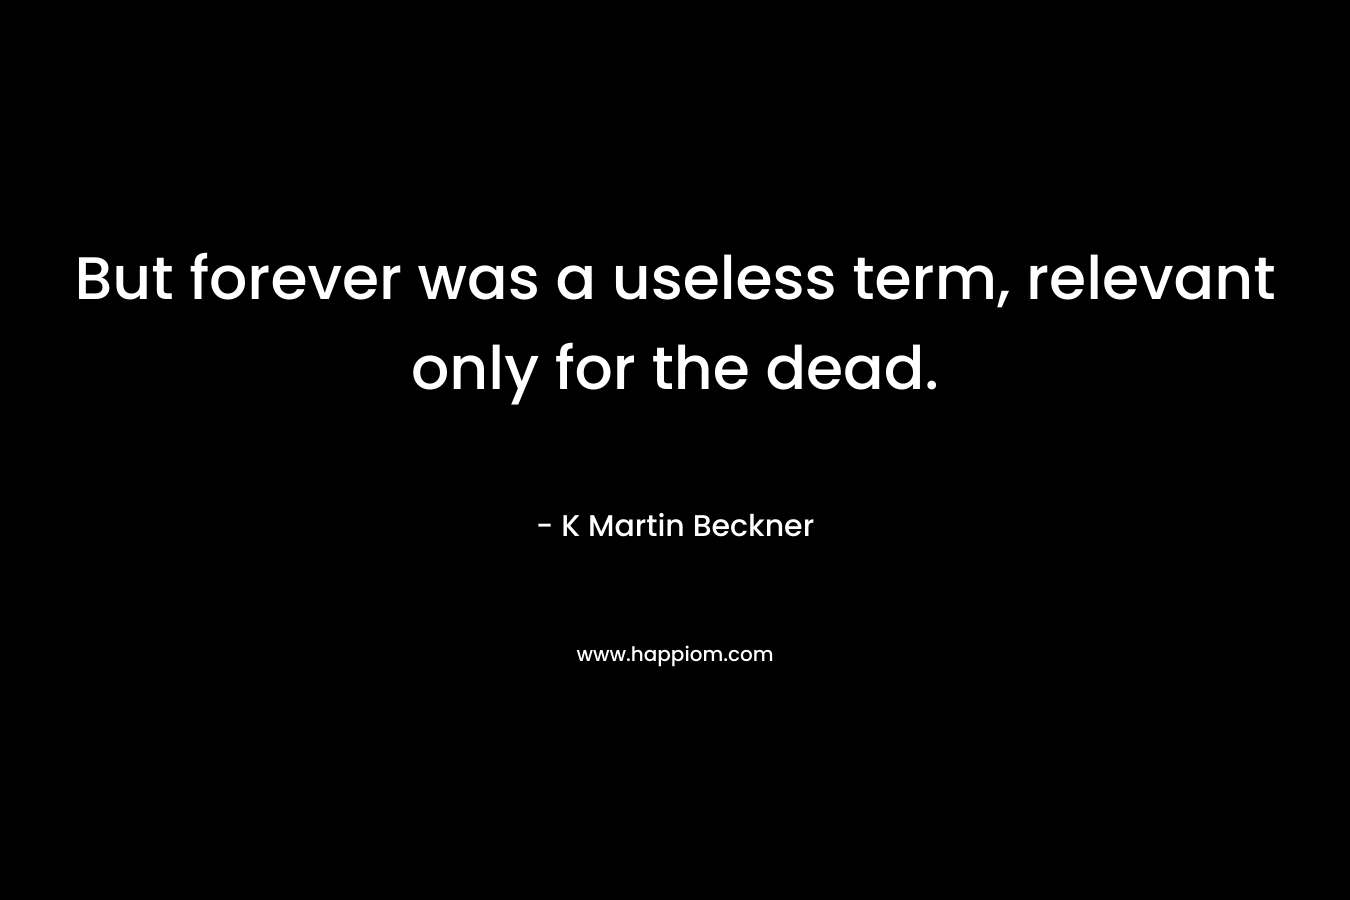 But forever was a useless term, relevant only for the dead. – K Martin Beckner